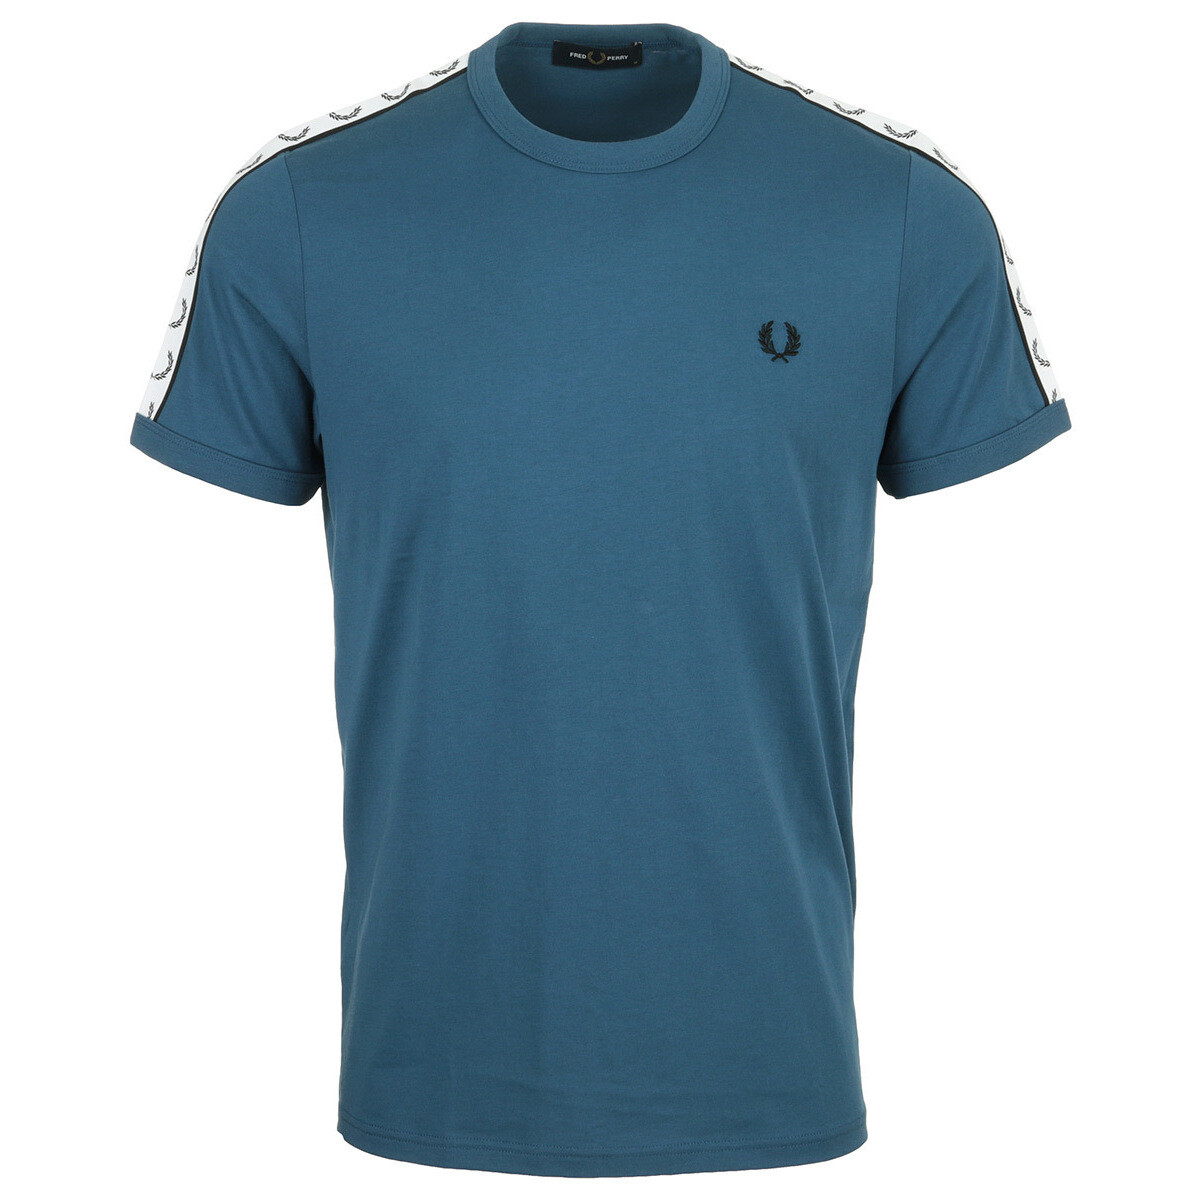 Vêtements Homme T-shirts manches courtes Fred Perry Taped Ringer Tee-Shirt Bleu